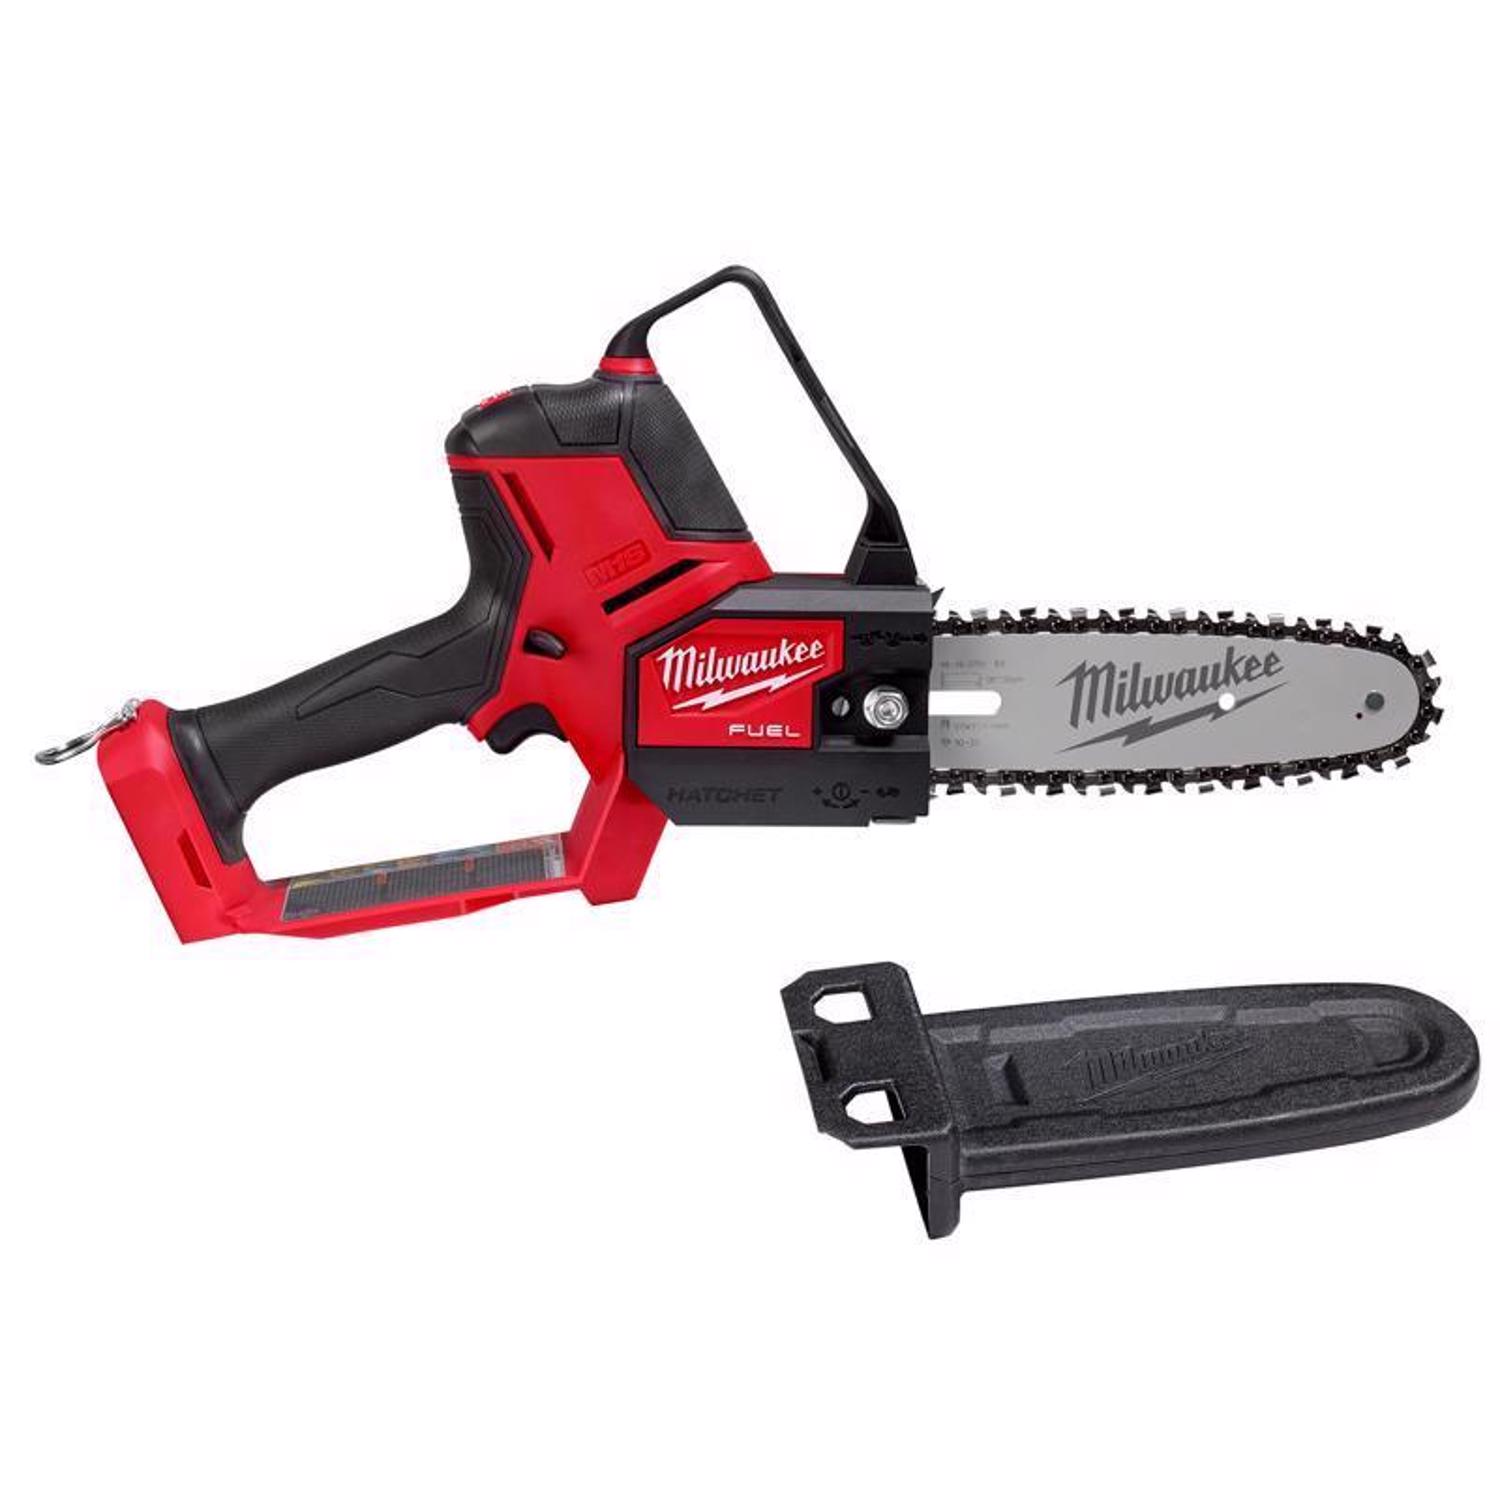 Photos - Power Saw Milwaukee M18 FUEL 3004-20 Hatchet 8 in. 18 V Battery Pruning Saw Tool Onl 